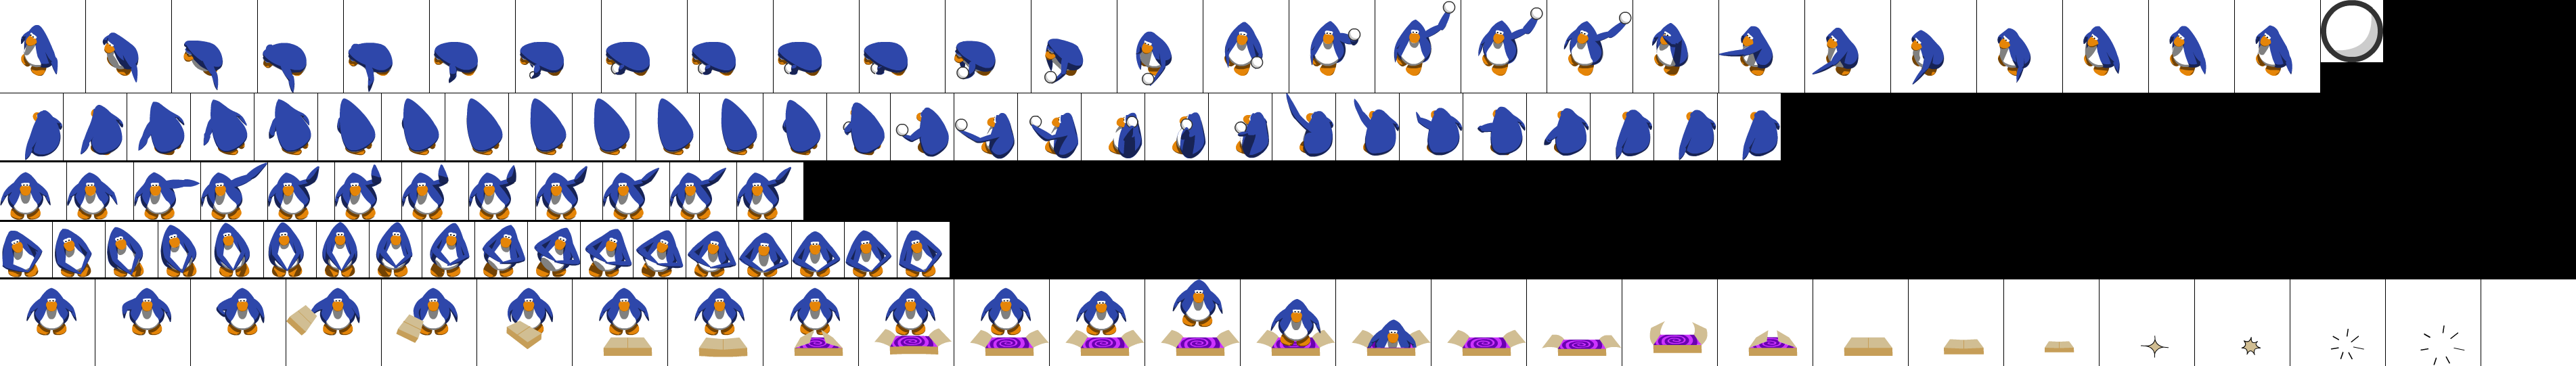 Penguin Special Animations (Old Blue)